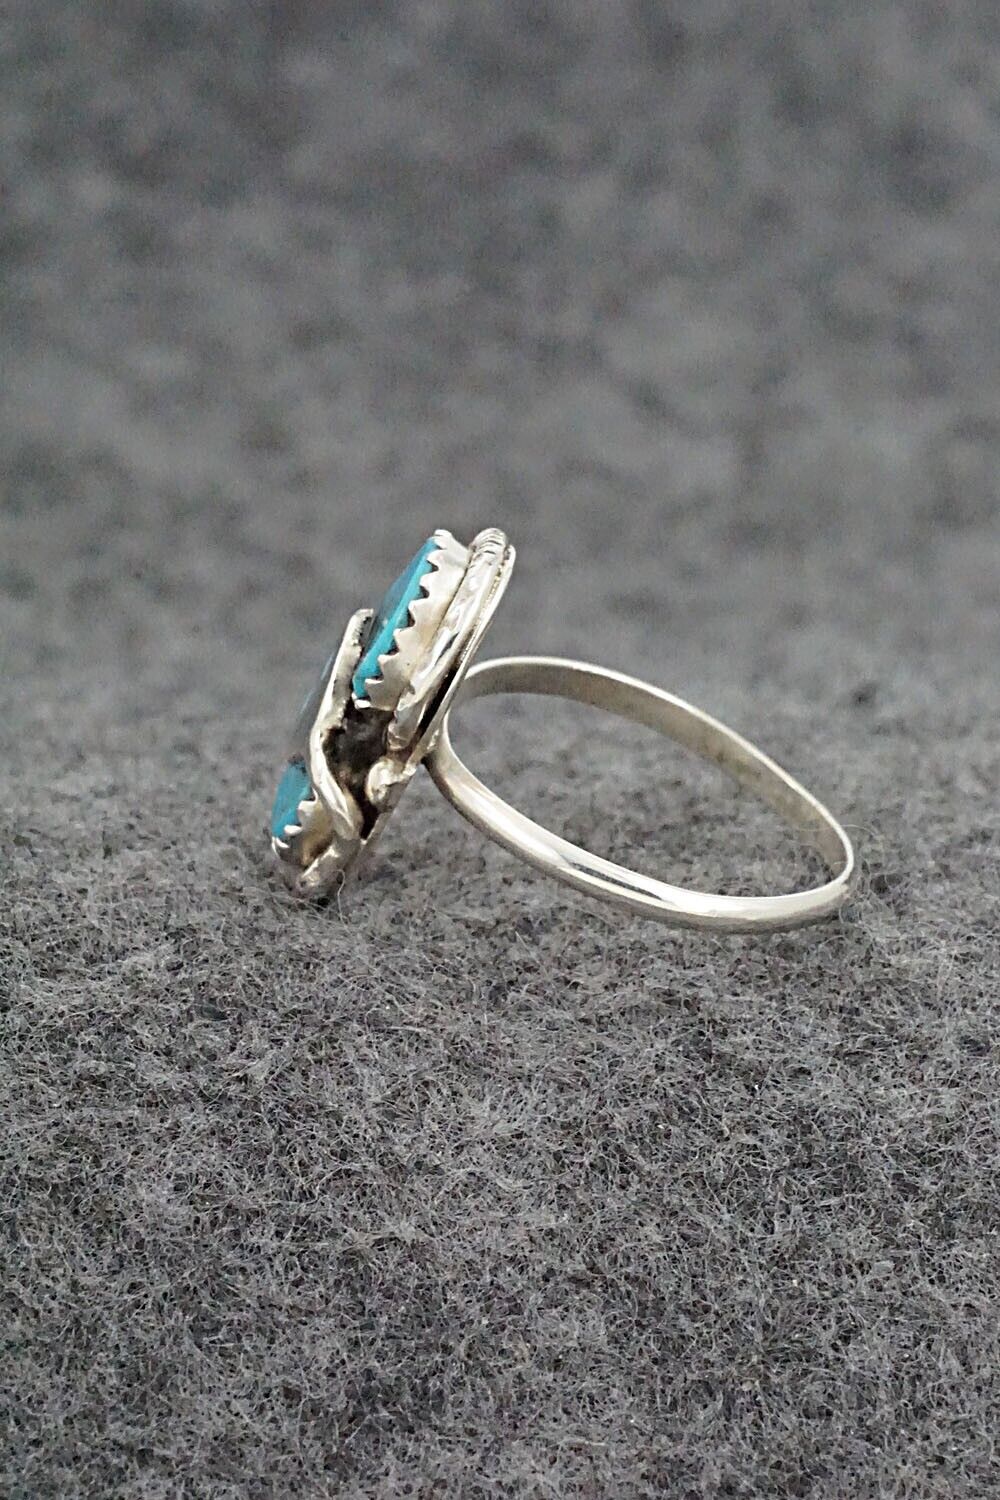 Turquoise & Sterling Silver Ring - Joy Calavaza - Size 7.5